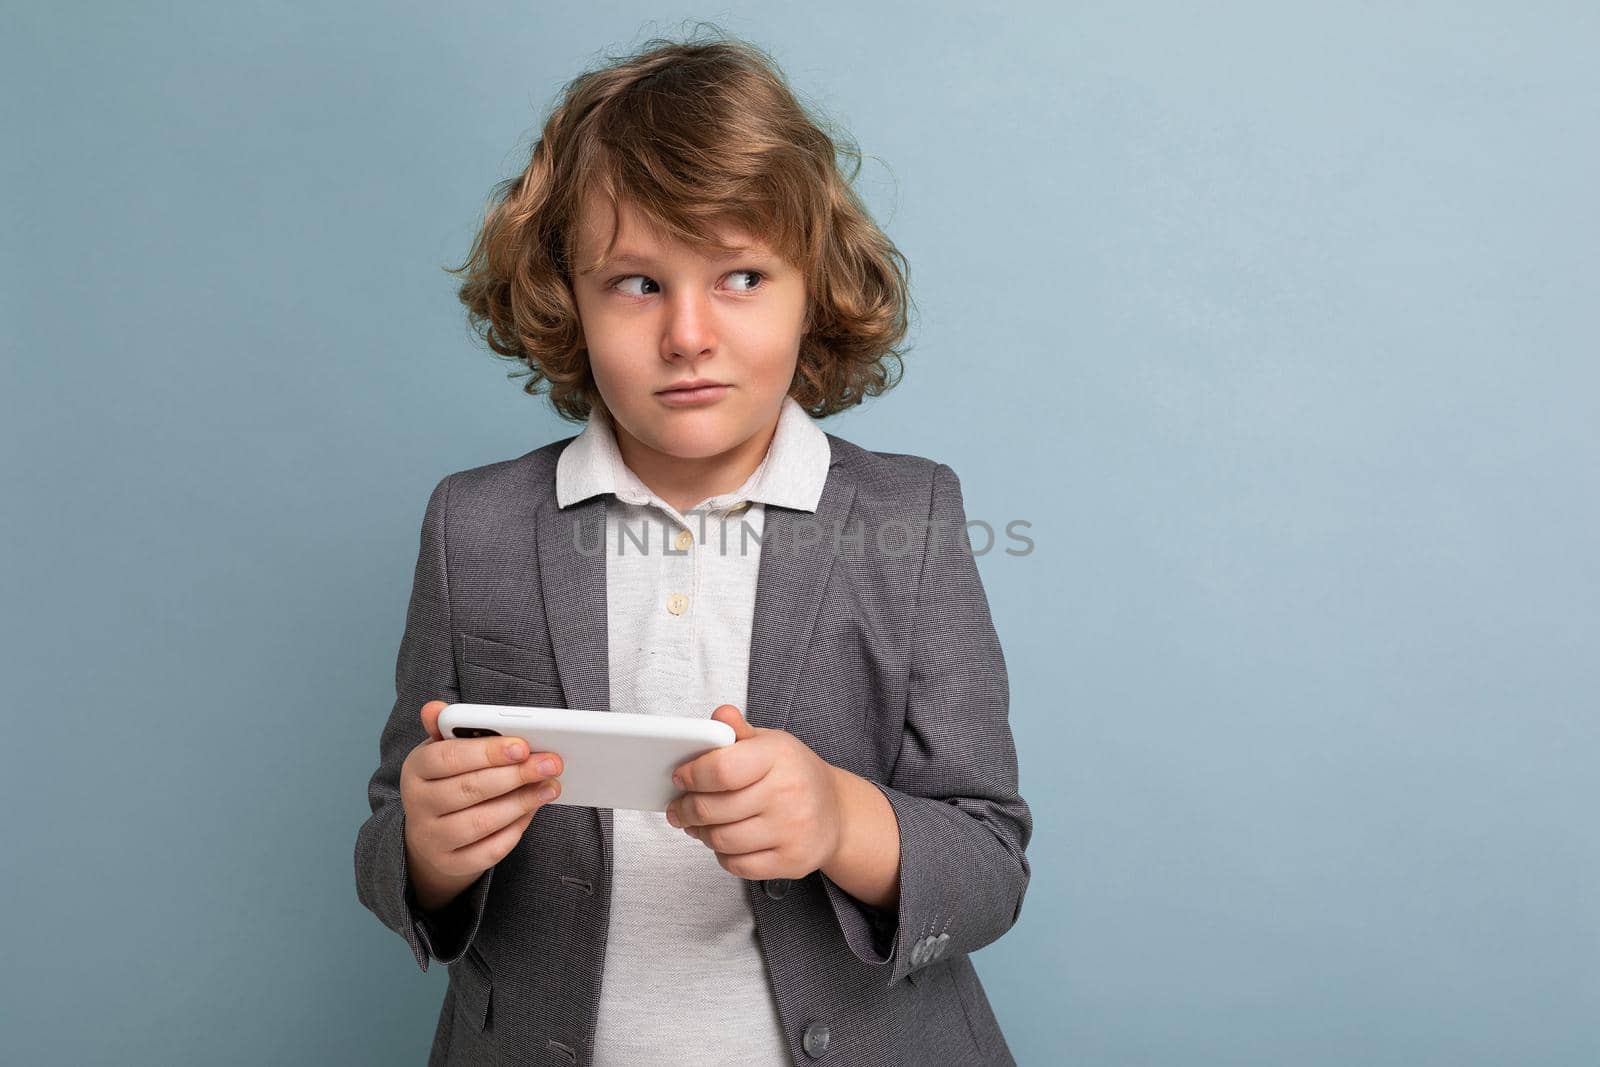 Photo shot of Handsome suspacted child boy with curly hair wearing grey suit holding and using phone isolated over blue background looking to the side playing games by TRMK